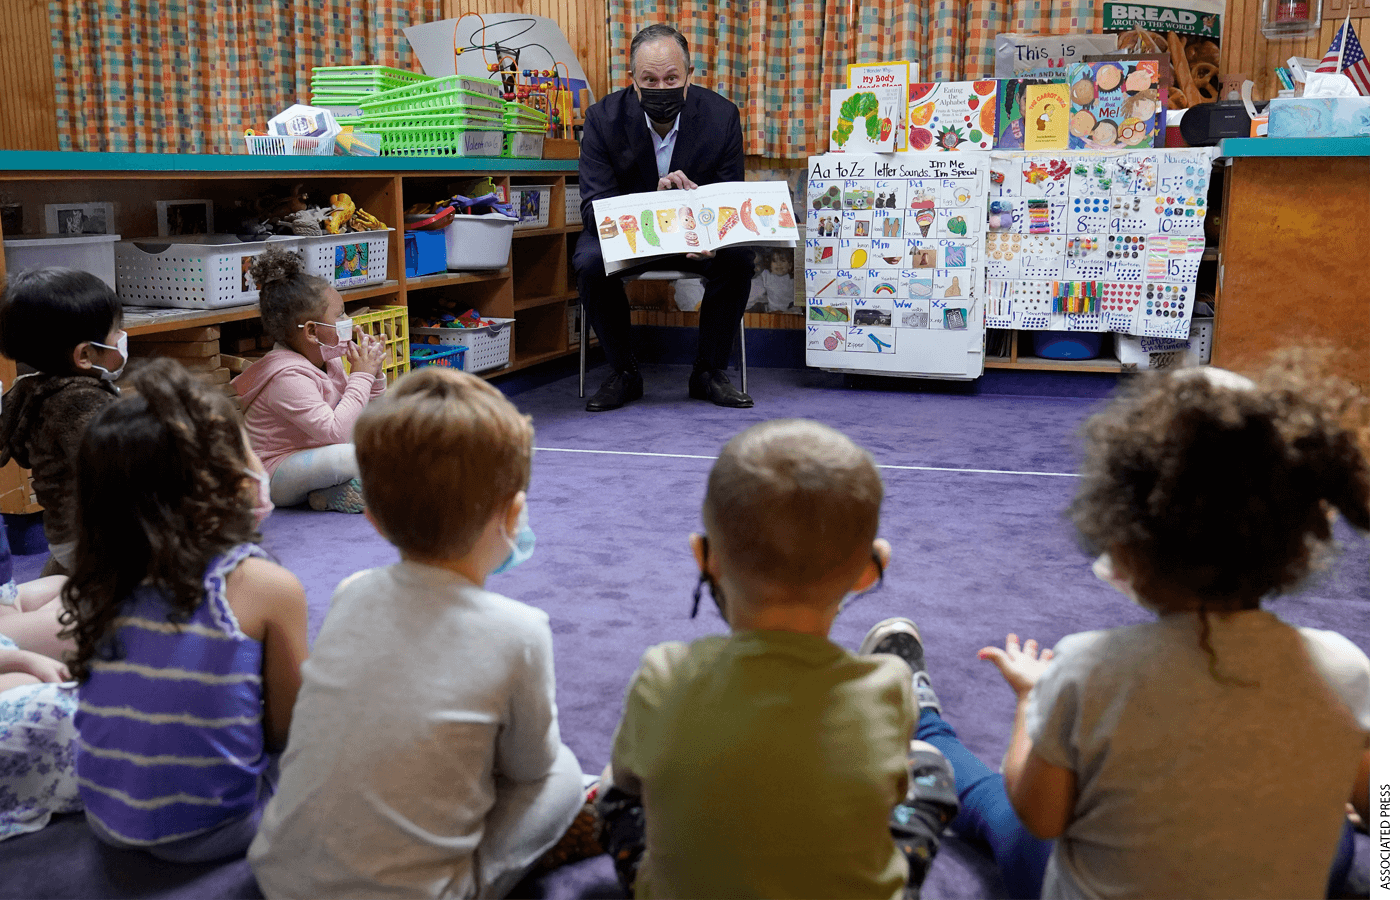 Douglas Emhoff, center, husband of Vice President Kamala Harris, reads The Very Hungry Caterpillar, by Eric Carle, to a group of pre-school children at Mother Hubbard Pre-School Center, Monday, Sept. 20, 2021, in Milford, Mass. Emhoff visited the child care center to draw attention to the Biden administration's Build Back Better agenda.